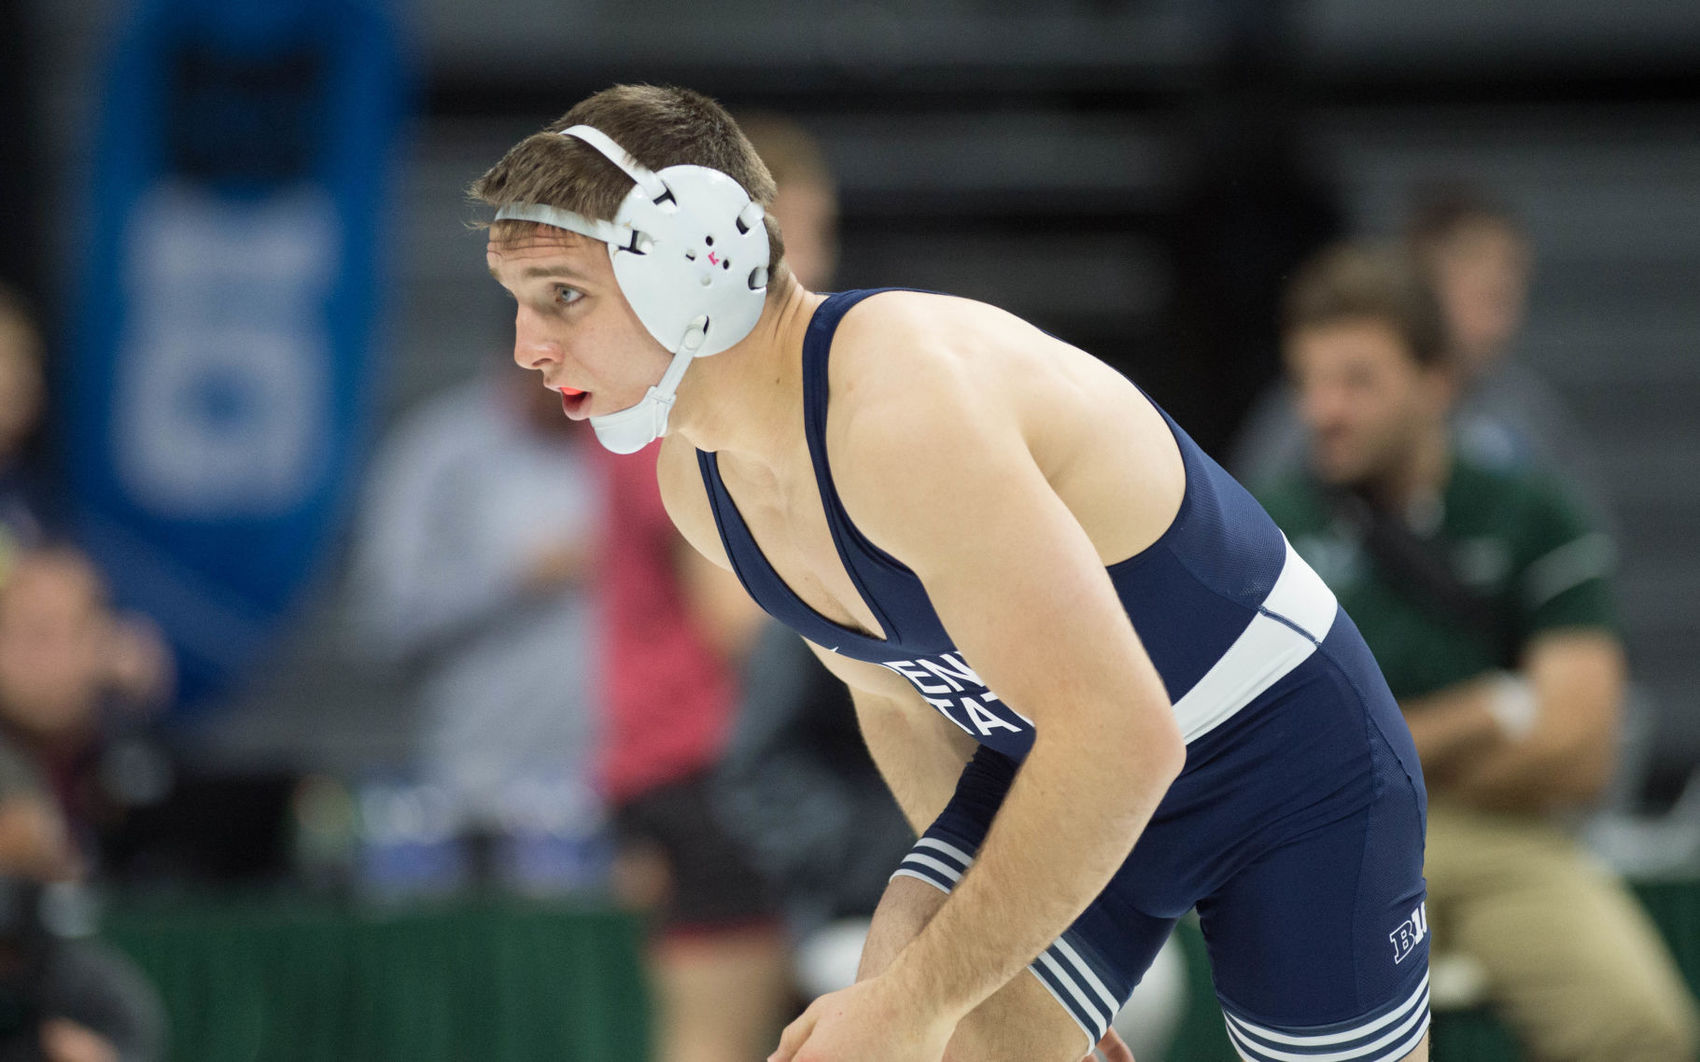 DAILY COLLEGIAN: Penn State's Zain Retherford wins 2nd straight Hodge Trophy as nation's best college wrestler